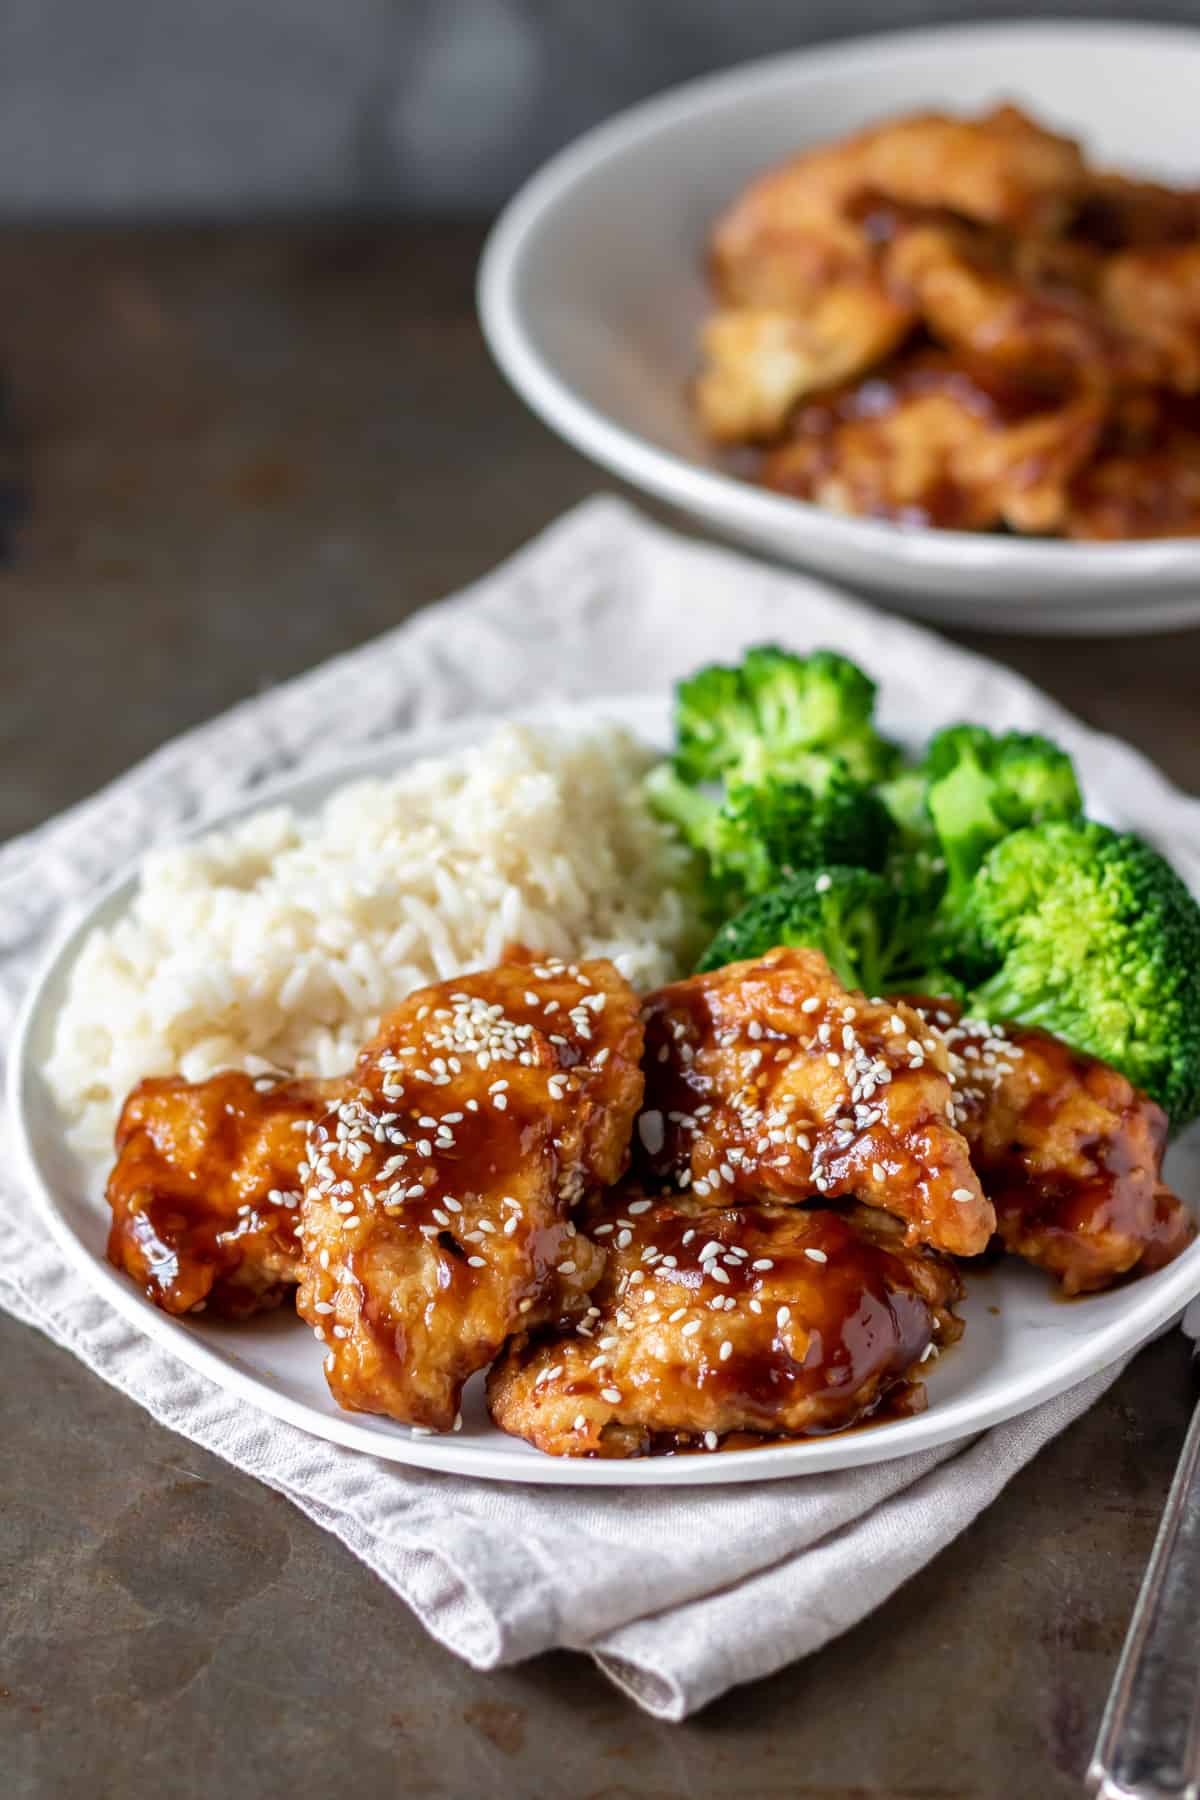 Table with a plate of rice, broccoli and sweet chili chicken.